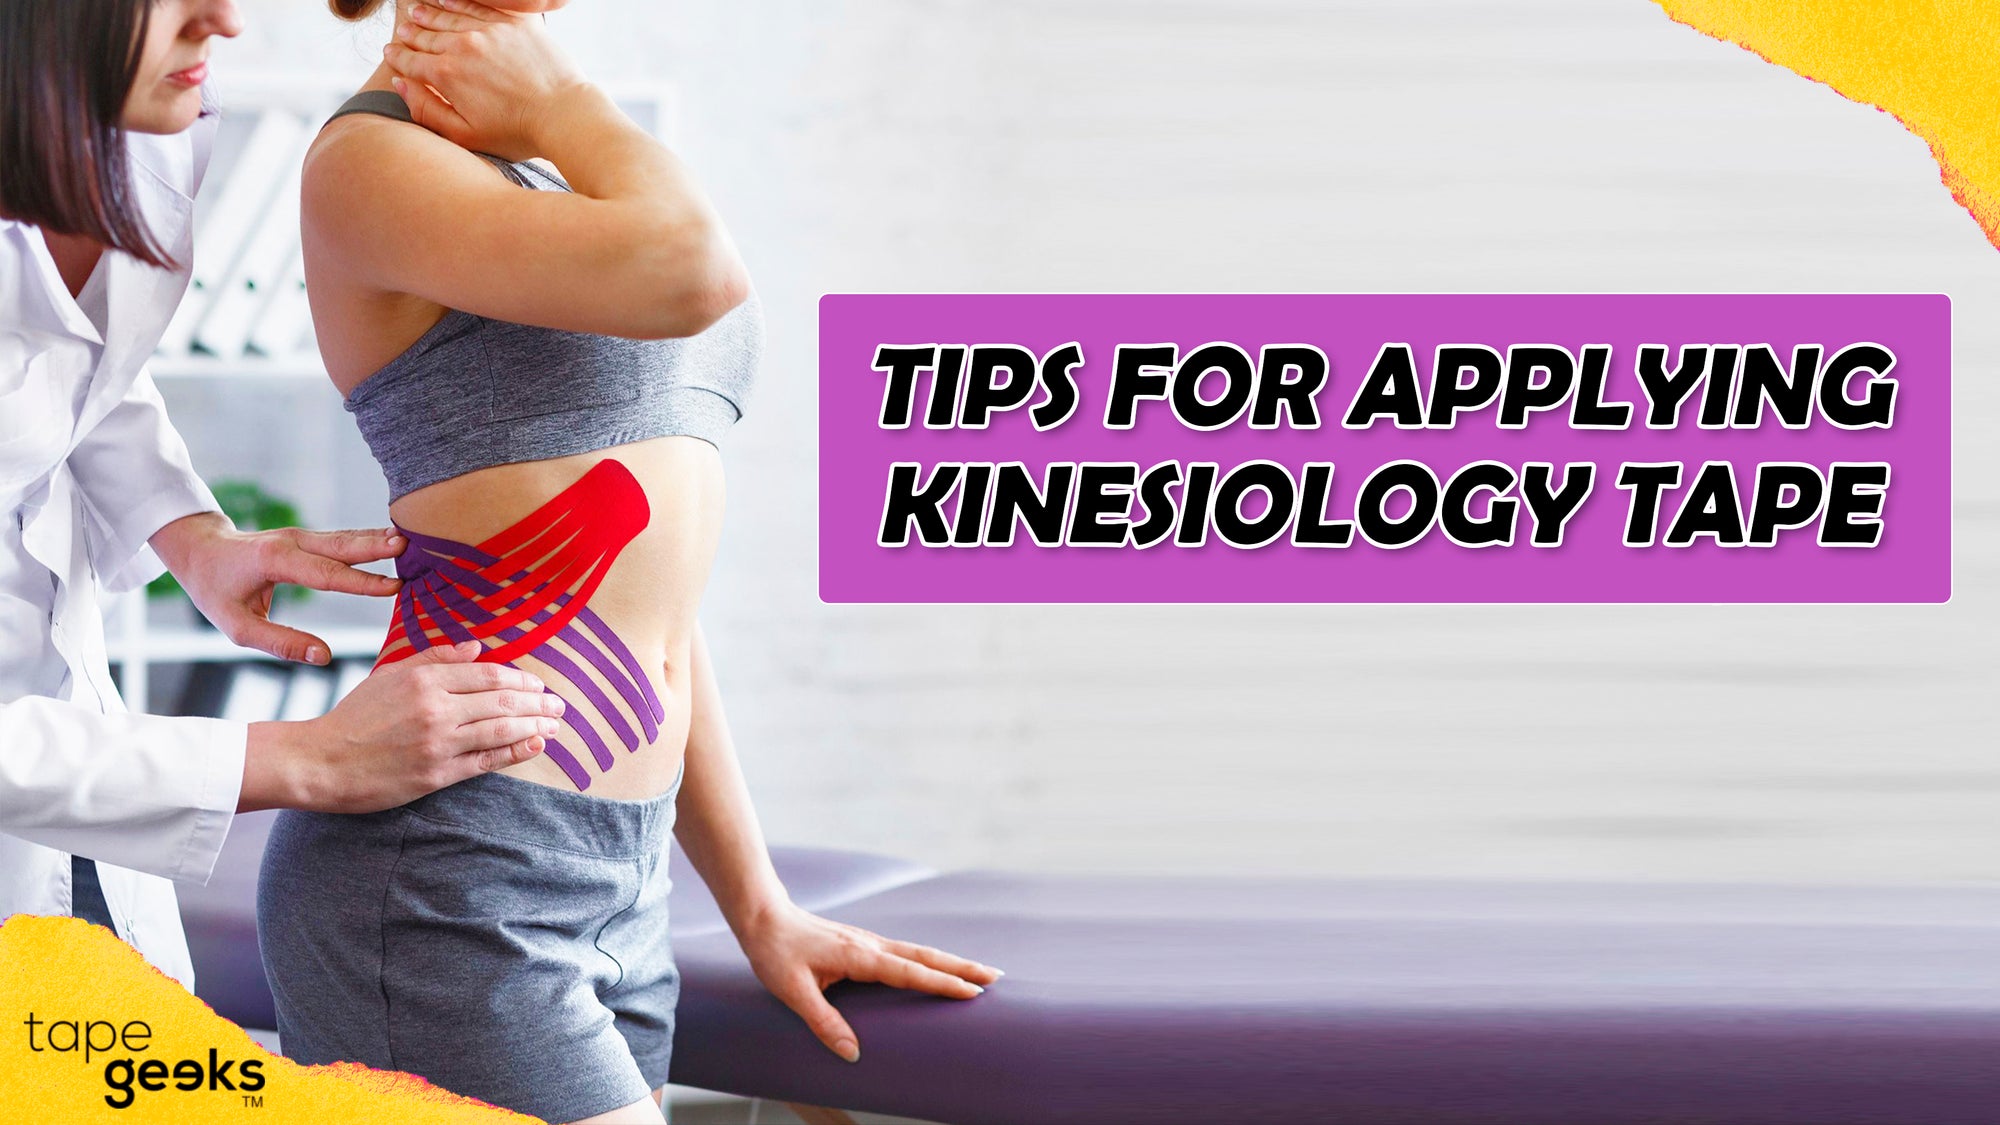 TIPS FOR APPLYING KINESIOLOGY TAPE